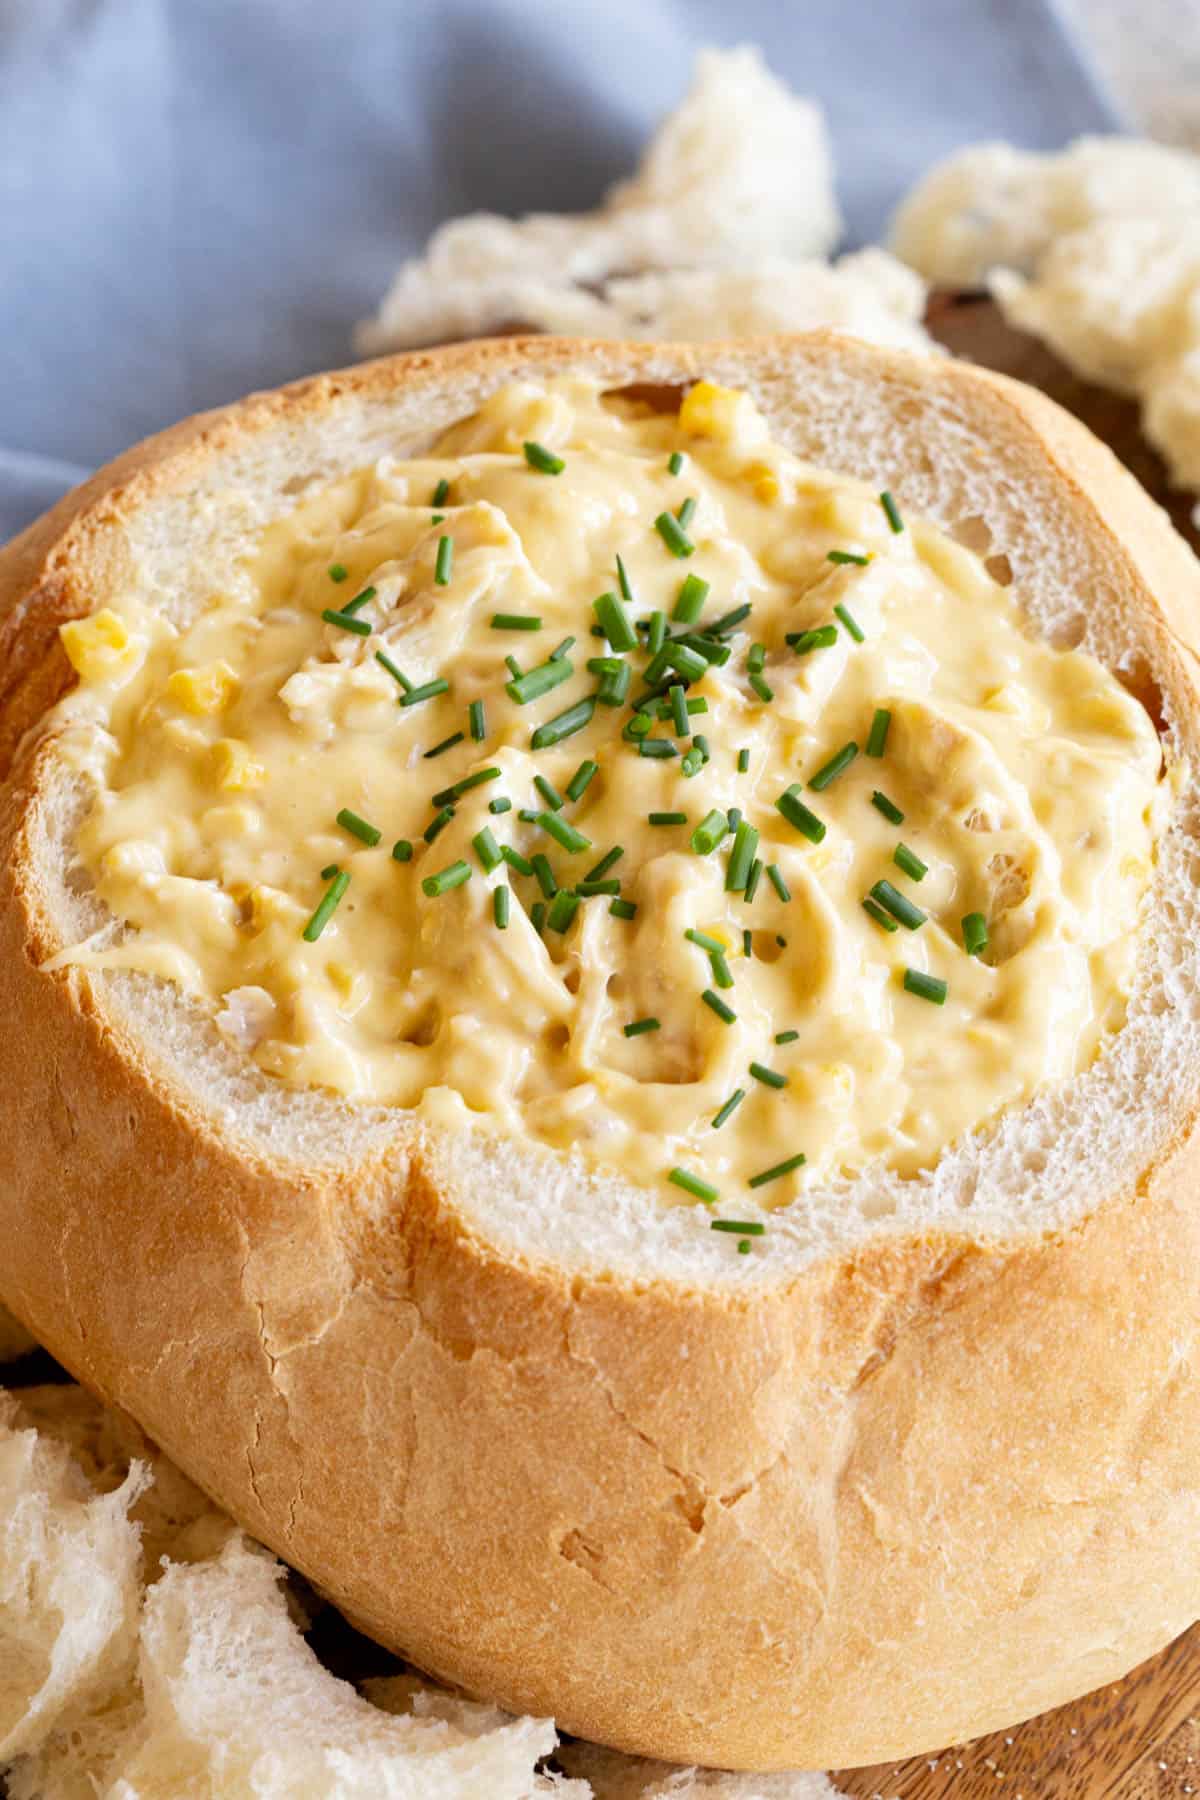 A chicken and corn dip in a cob loaf with chives for garnish.